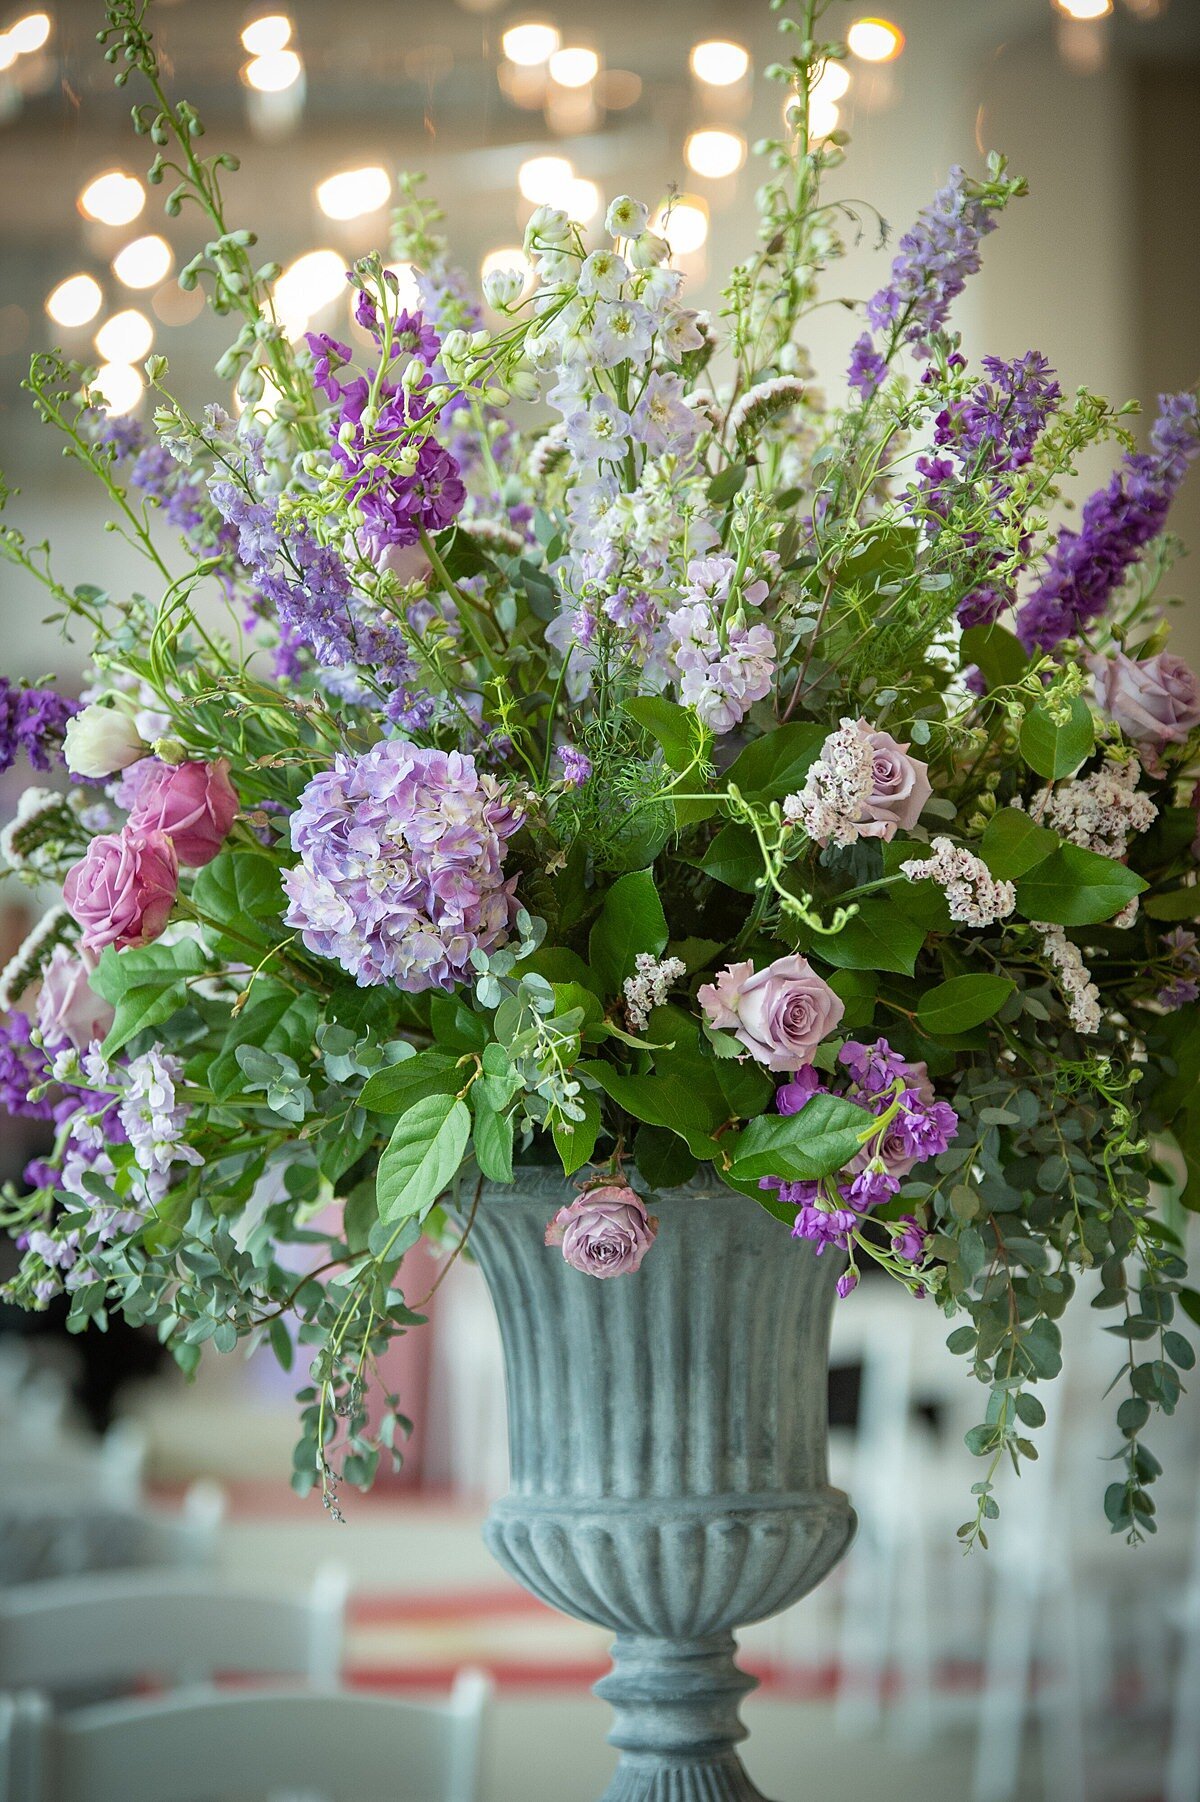 A large floral arrangement in a grey stone urn at Noah Liff Opera Center features pink roses, light purple roses, purple hydrangea, purple stock eucalyptus and greenery at a wedding with white garden chairs.